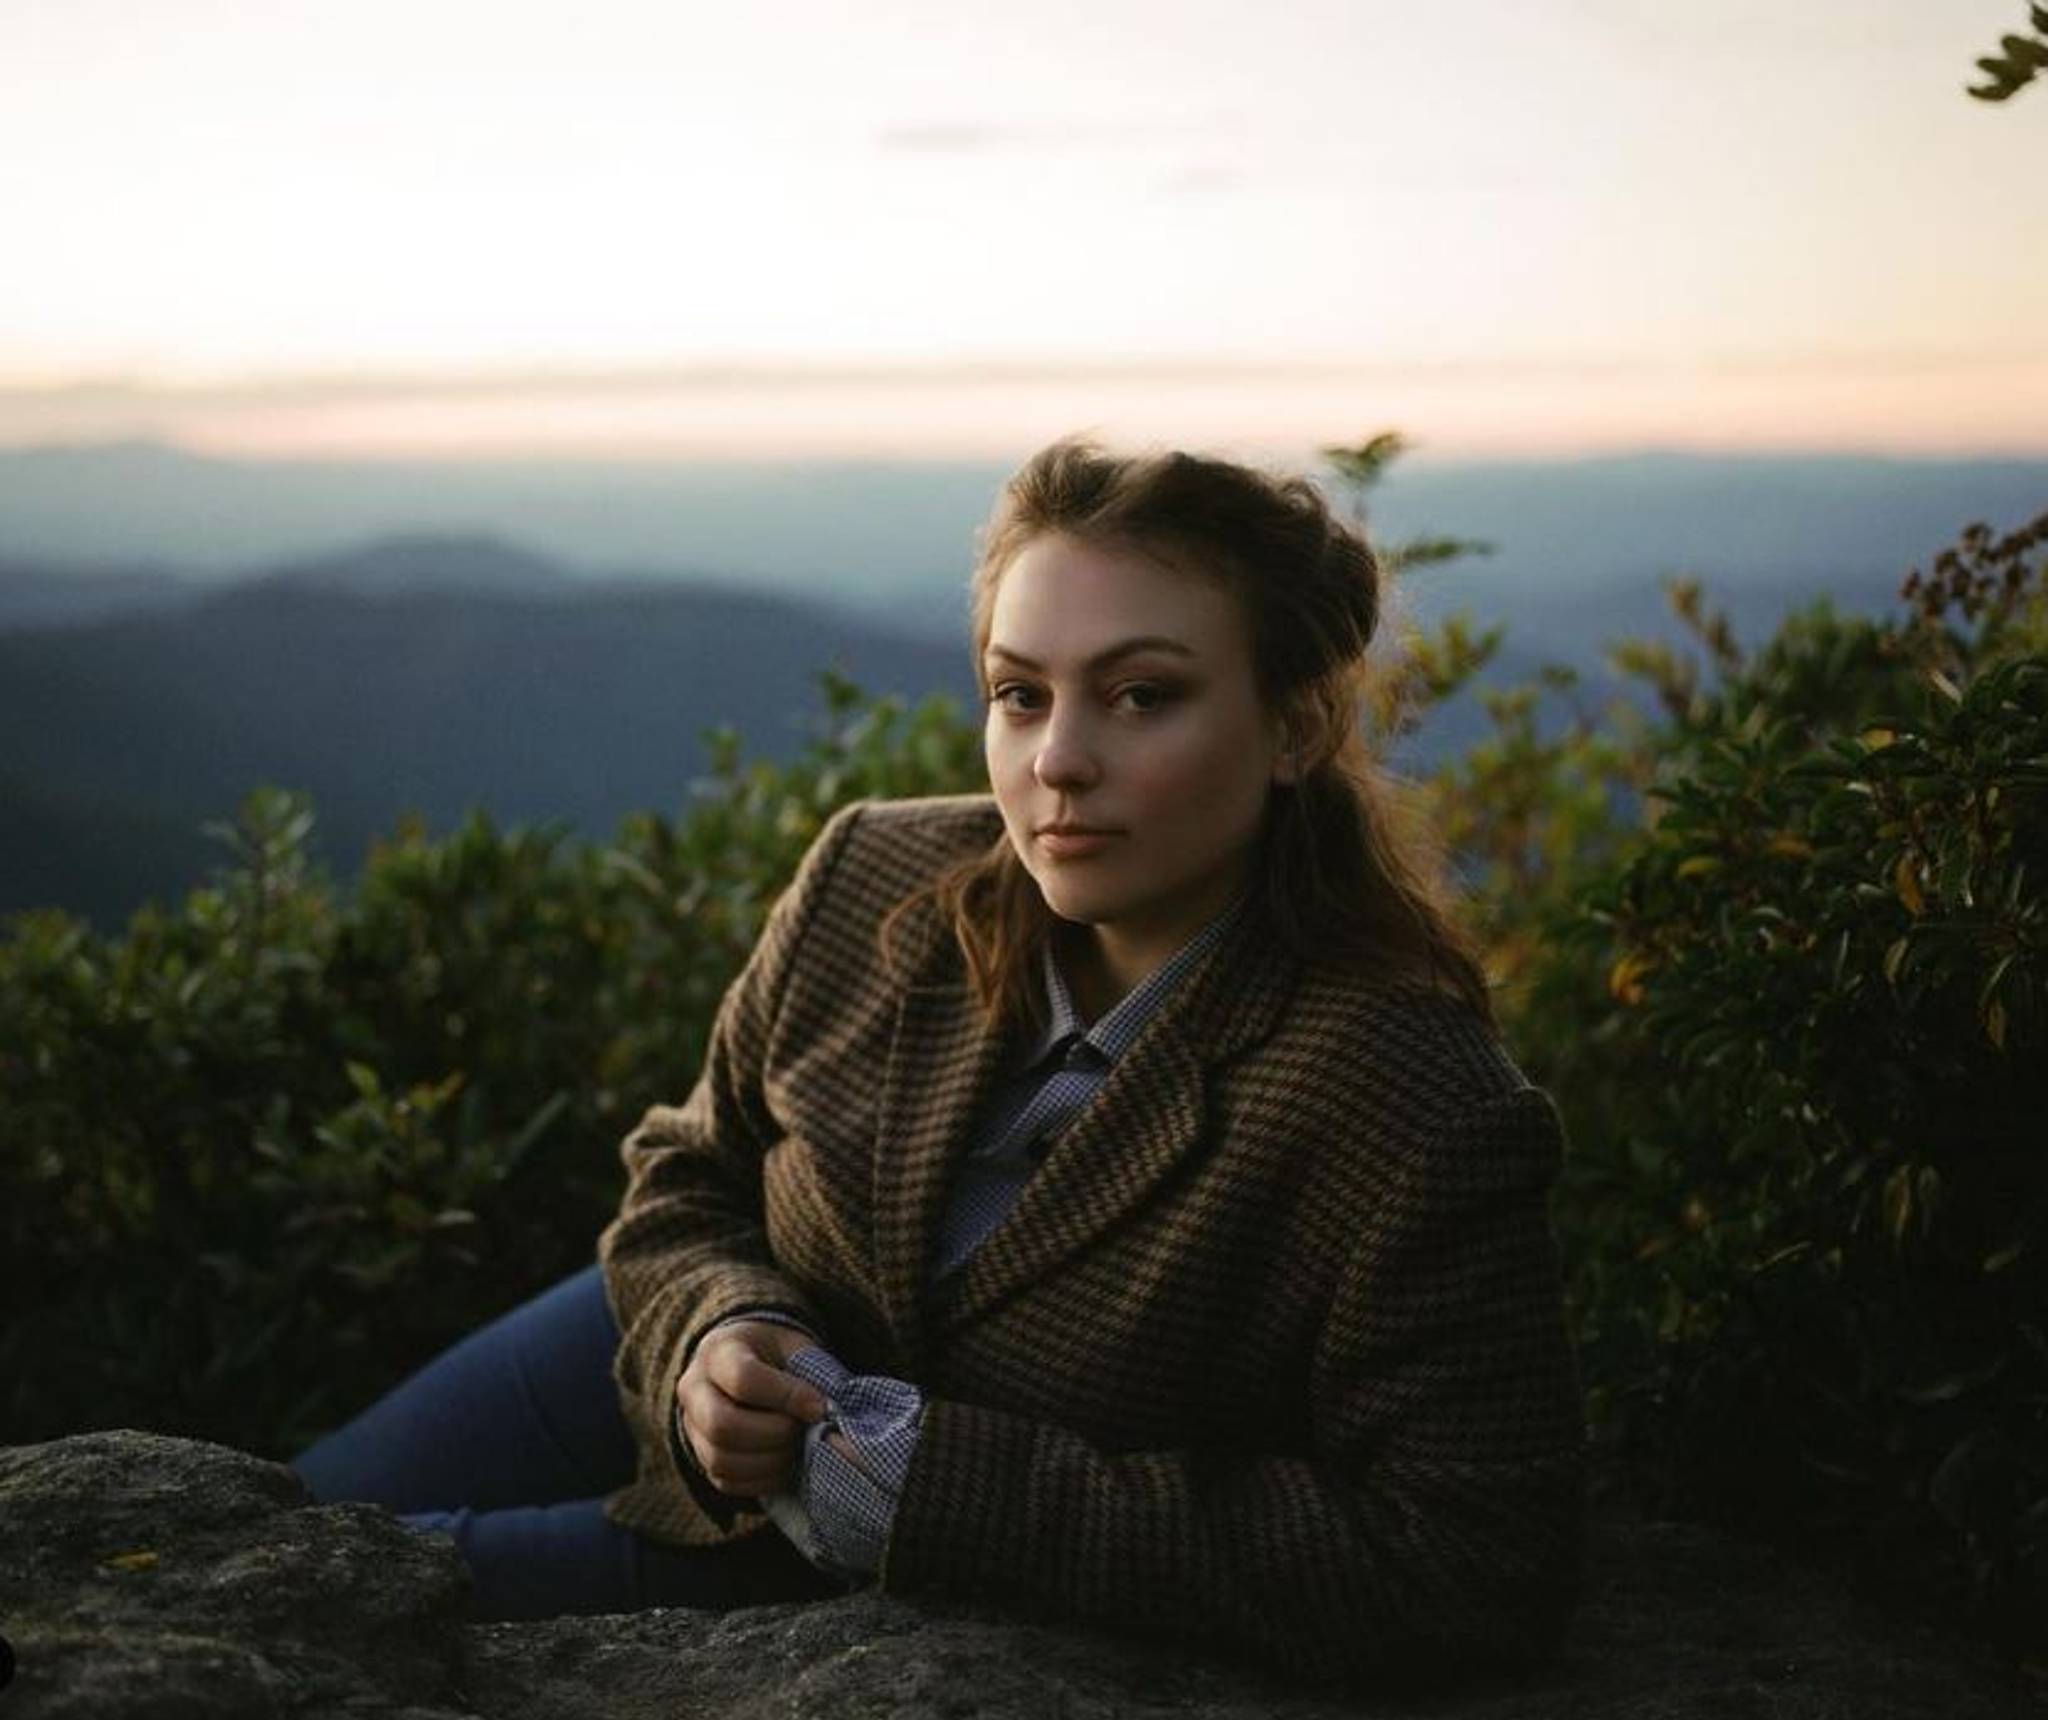 Angel Olsen gives music fans low-cost carbon offsetting